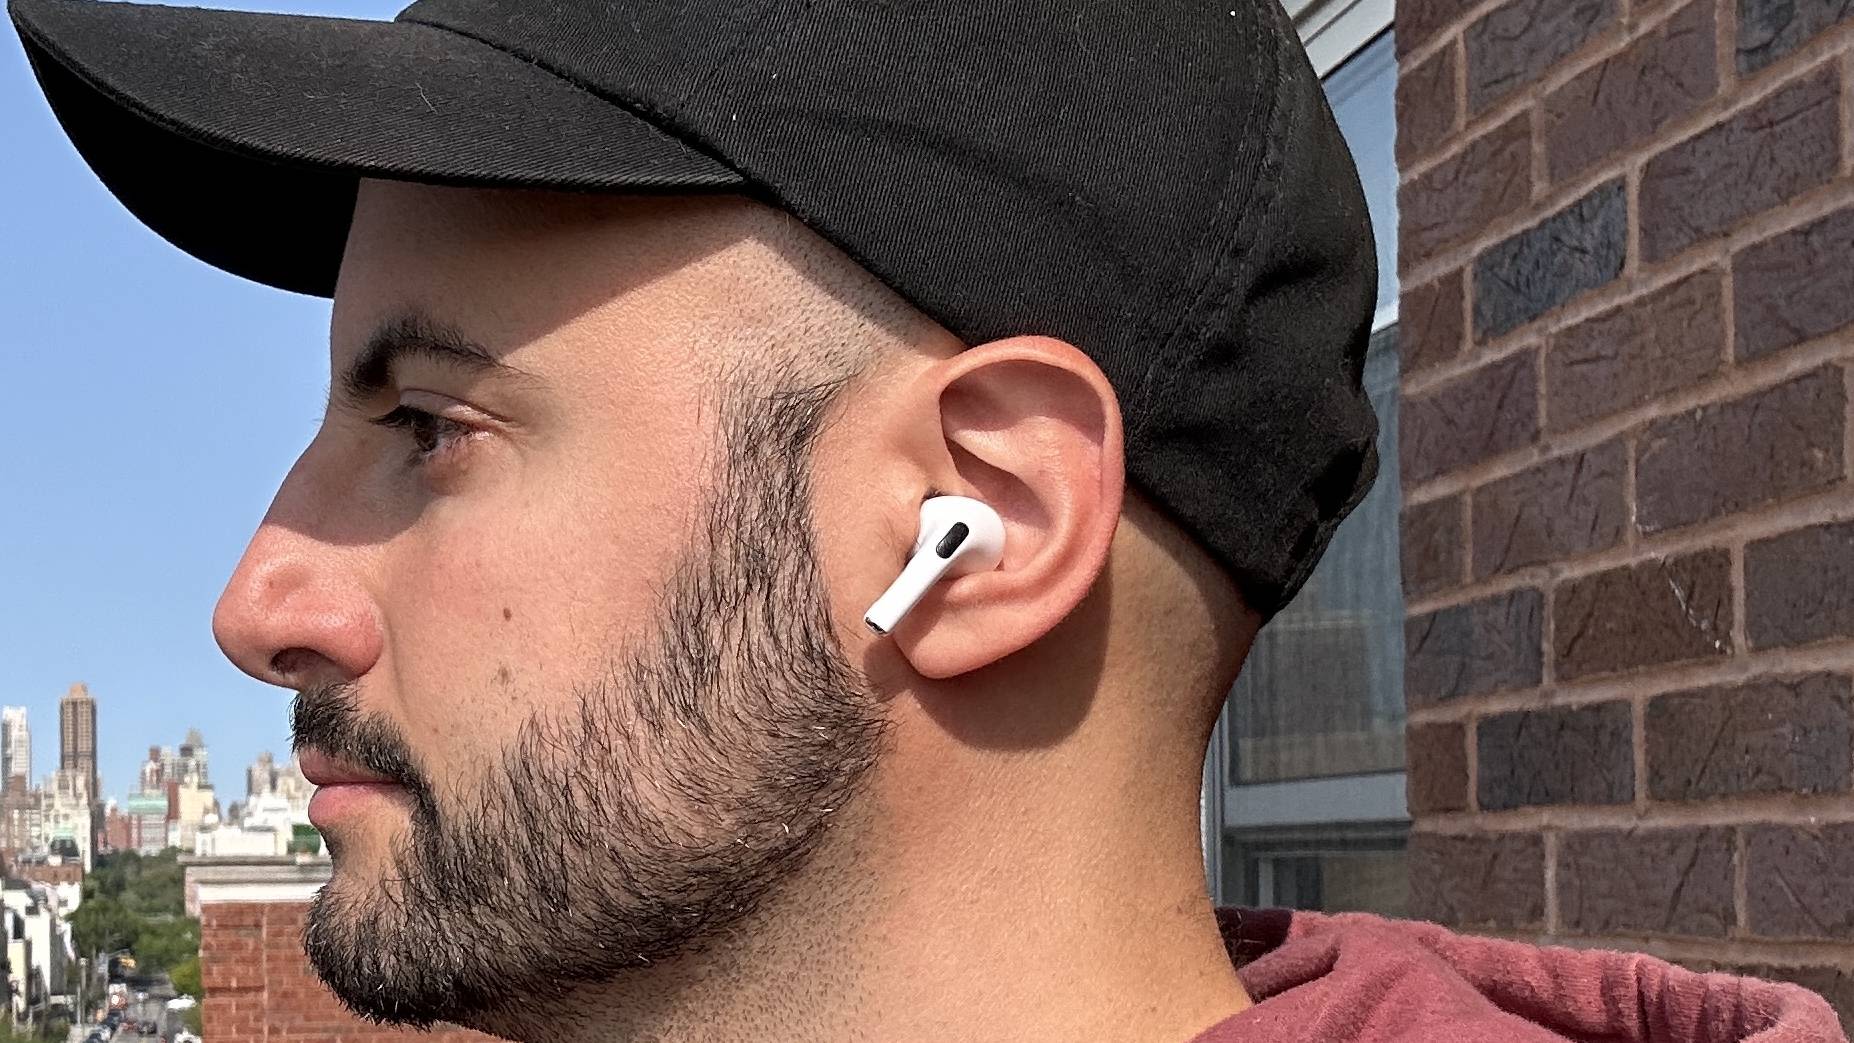 Apple AirPods Pro review: new in-ear design and active noise cancellation -  The Verge